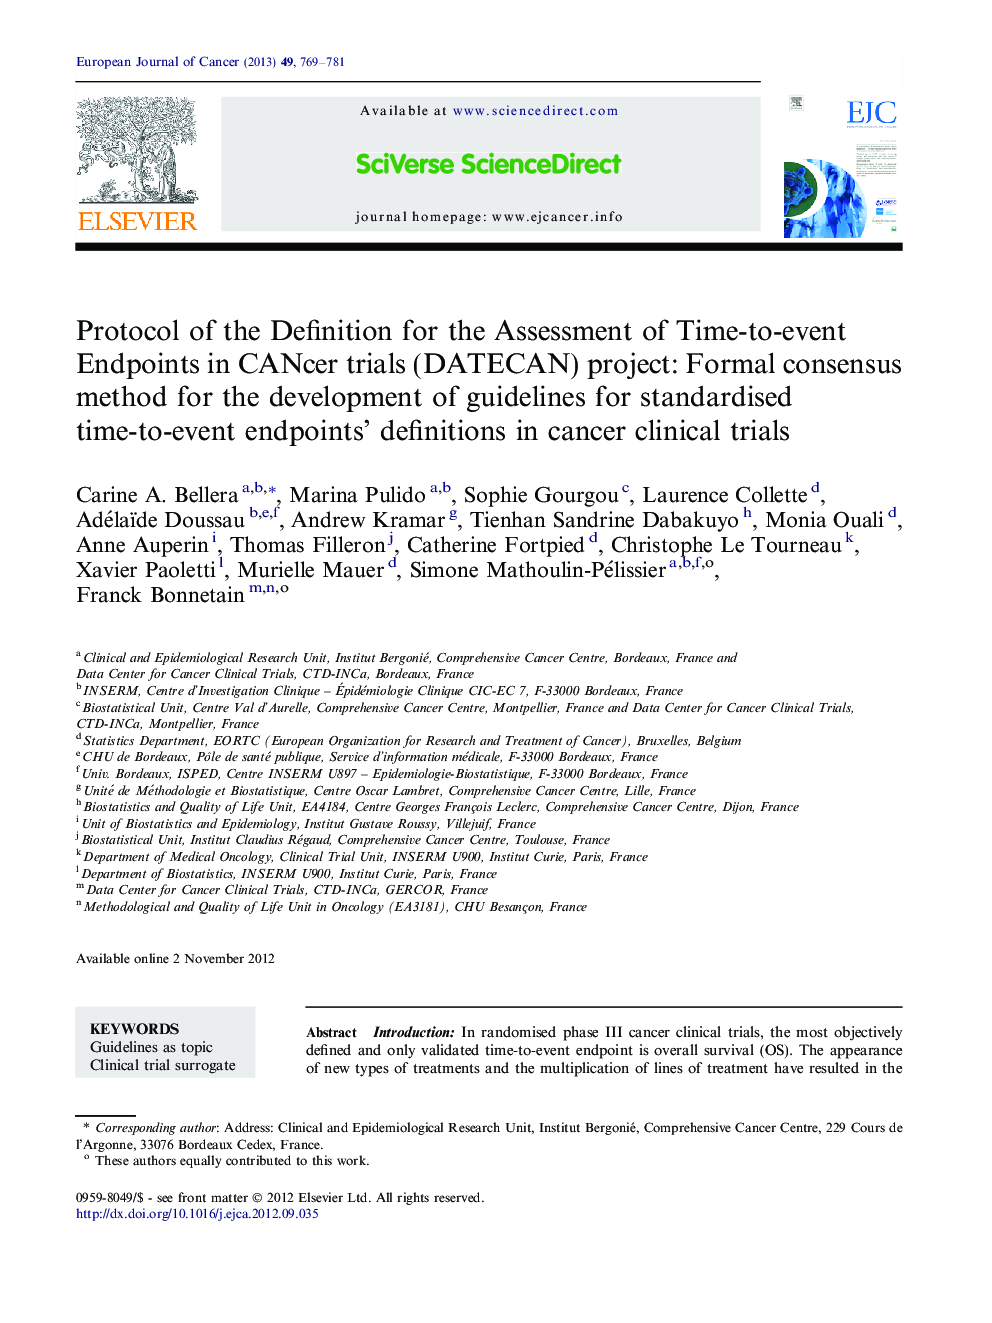 Protocol of the Definition for the Assessment of Time-to-event Endpoints in CANcer trials (DATECAN) project: Formal consensus method for the development of guidelines for standardised time-to-event endpoints' definitions in cancer clinical trials